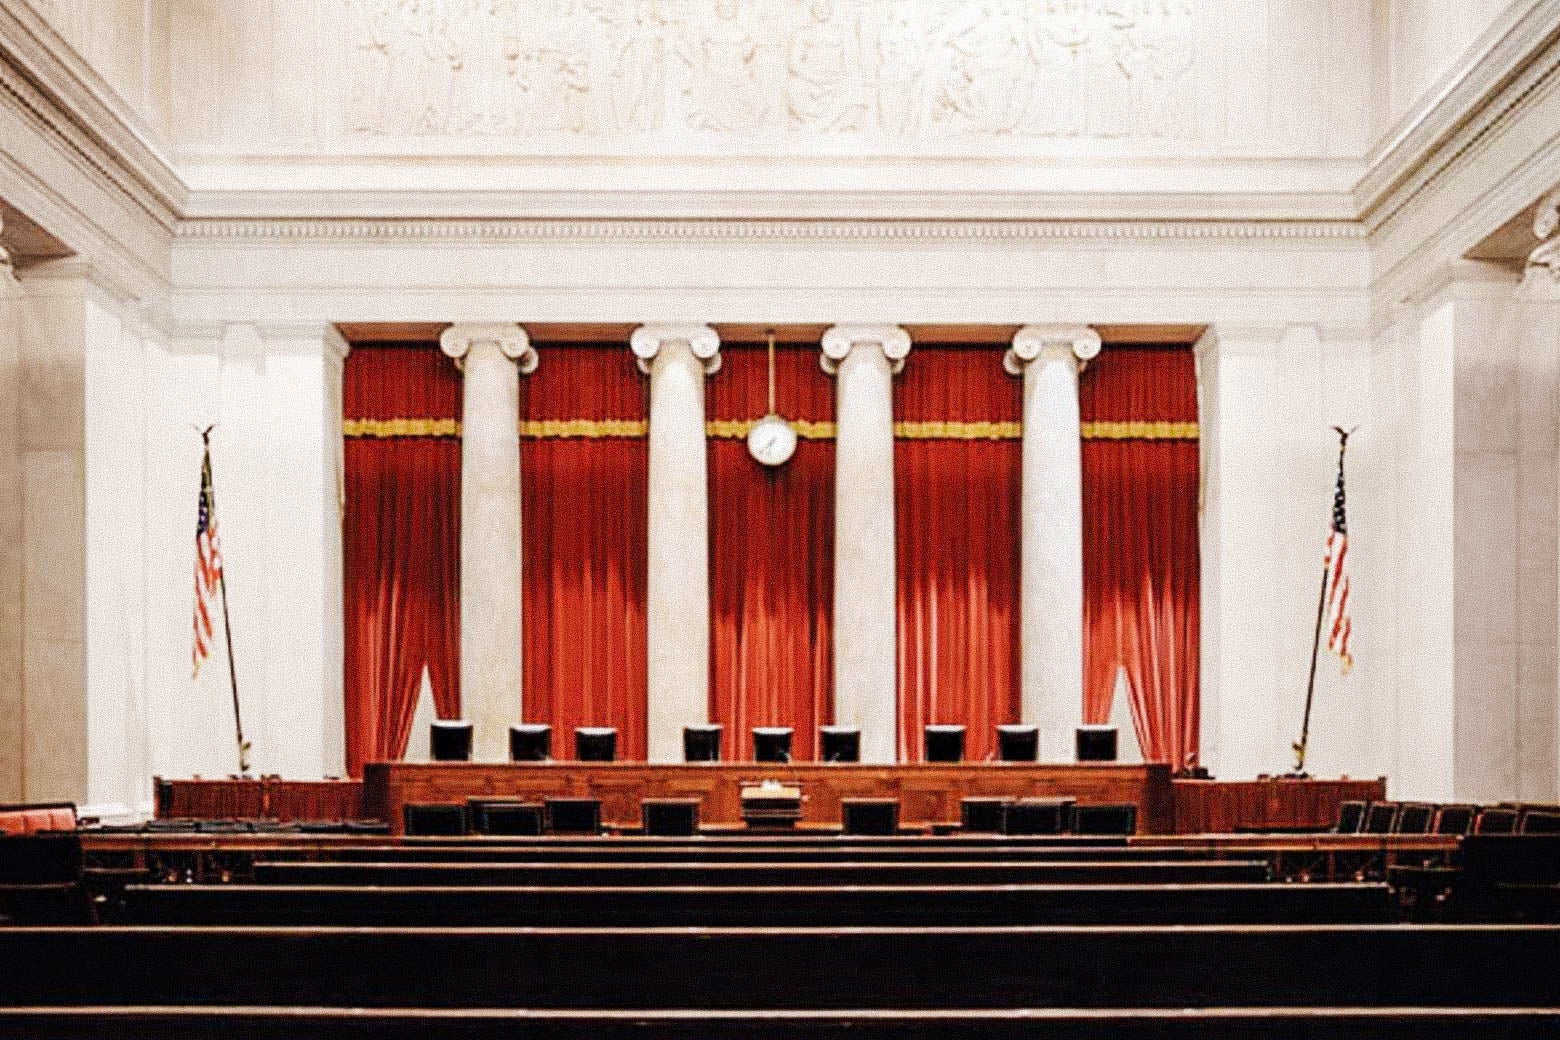 Interior of the Supreme Court chamber